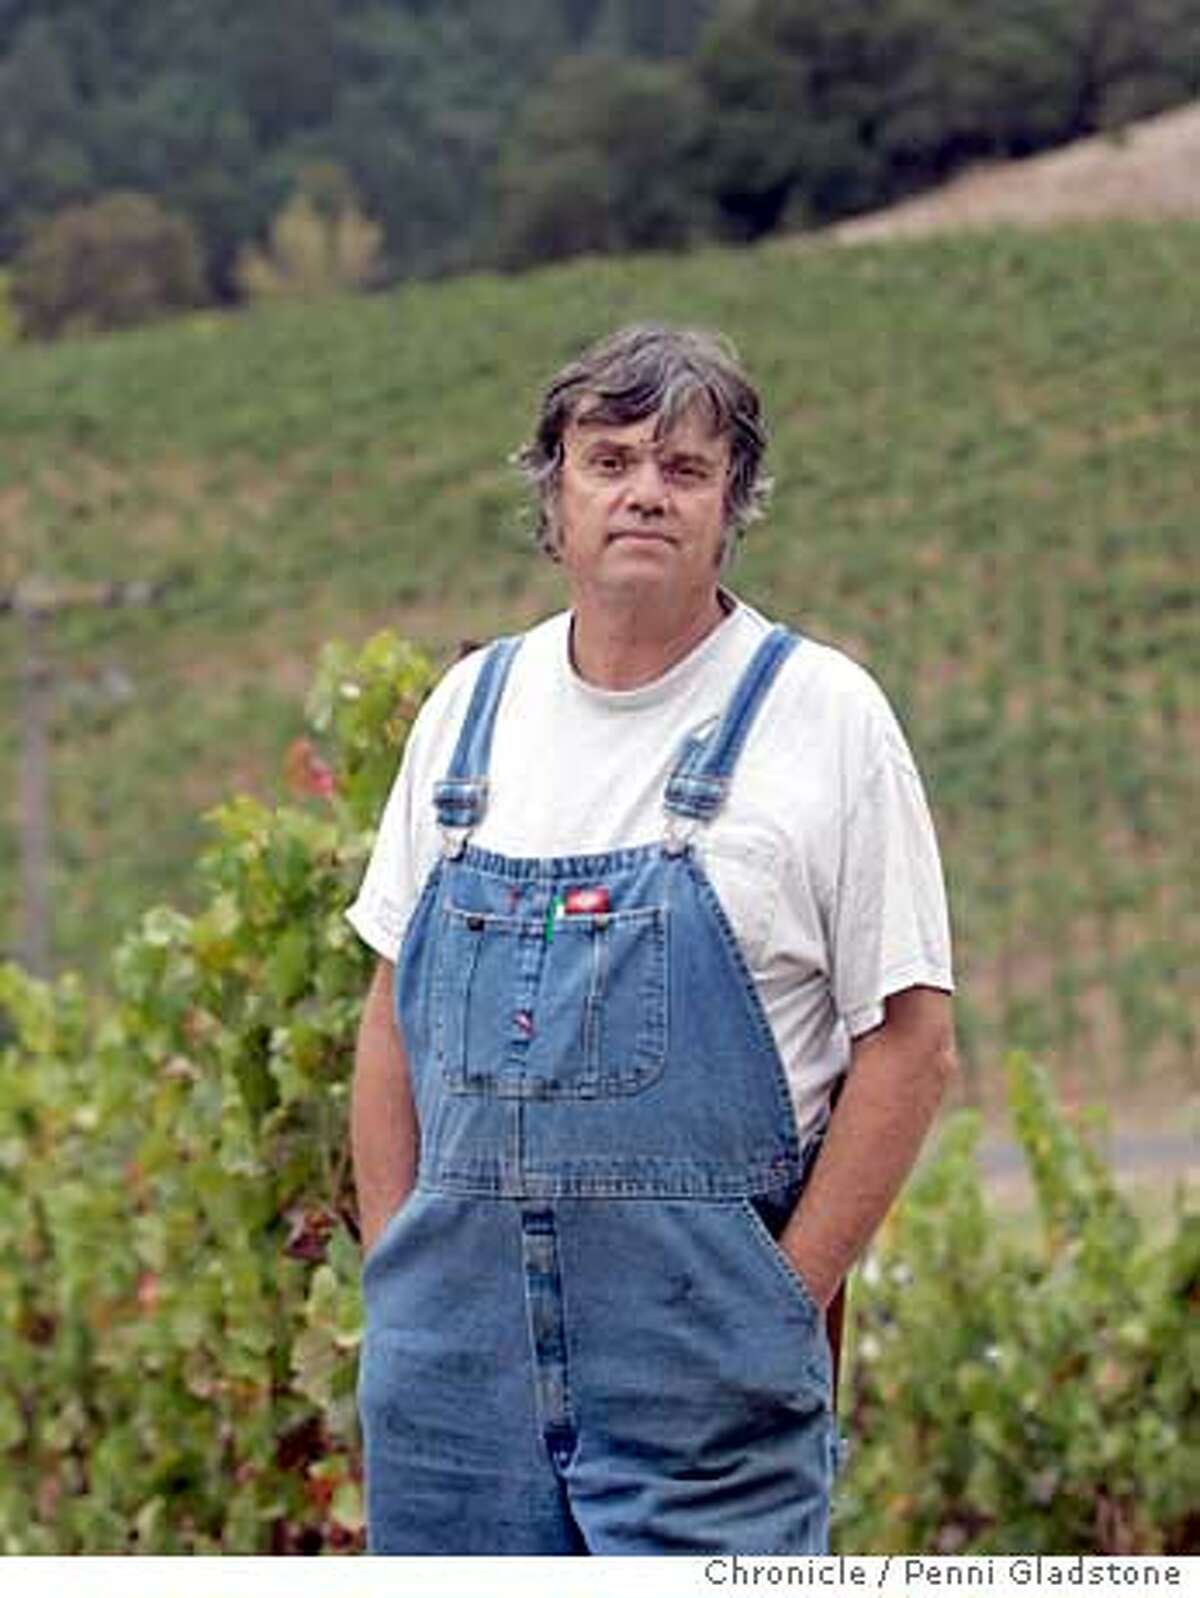 ELECTION_SOONOMA_0121_PG.JPG George Davis, (favors M) owner of Porter Creek Vineyards in Healdsberg Measure M in Sonoma county which would ban genetically modified crops. San Francisco Chronicle, Penni Gladstone Photo taken on 10/18/05, in Healdsberg,